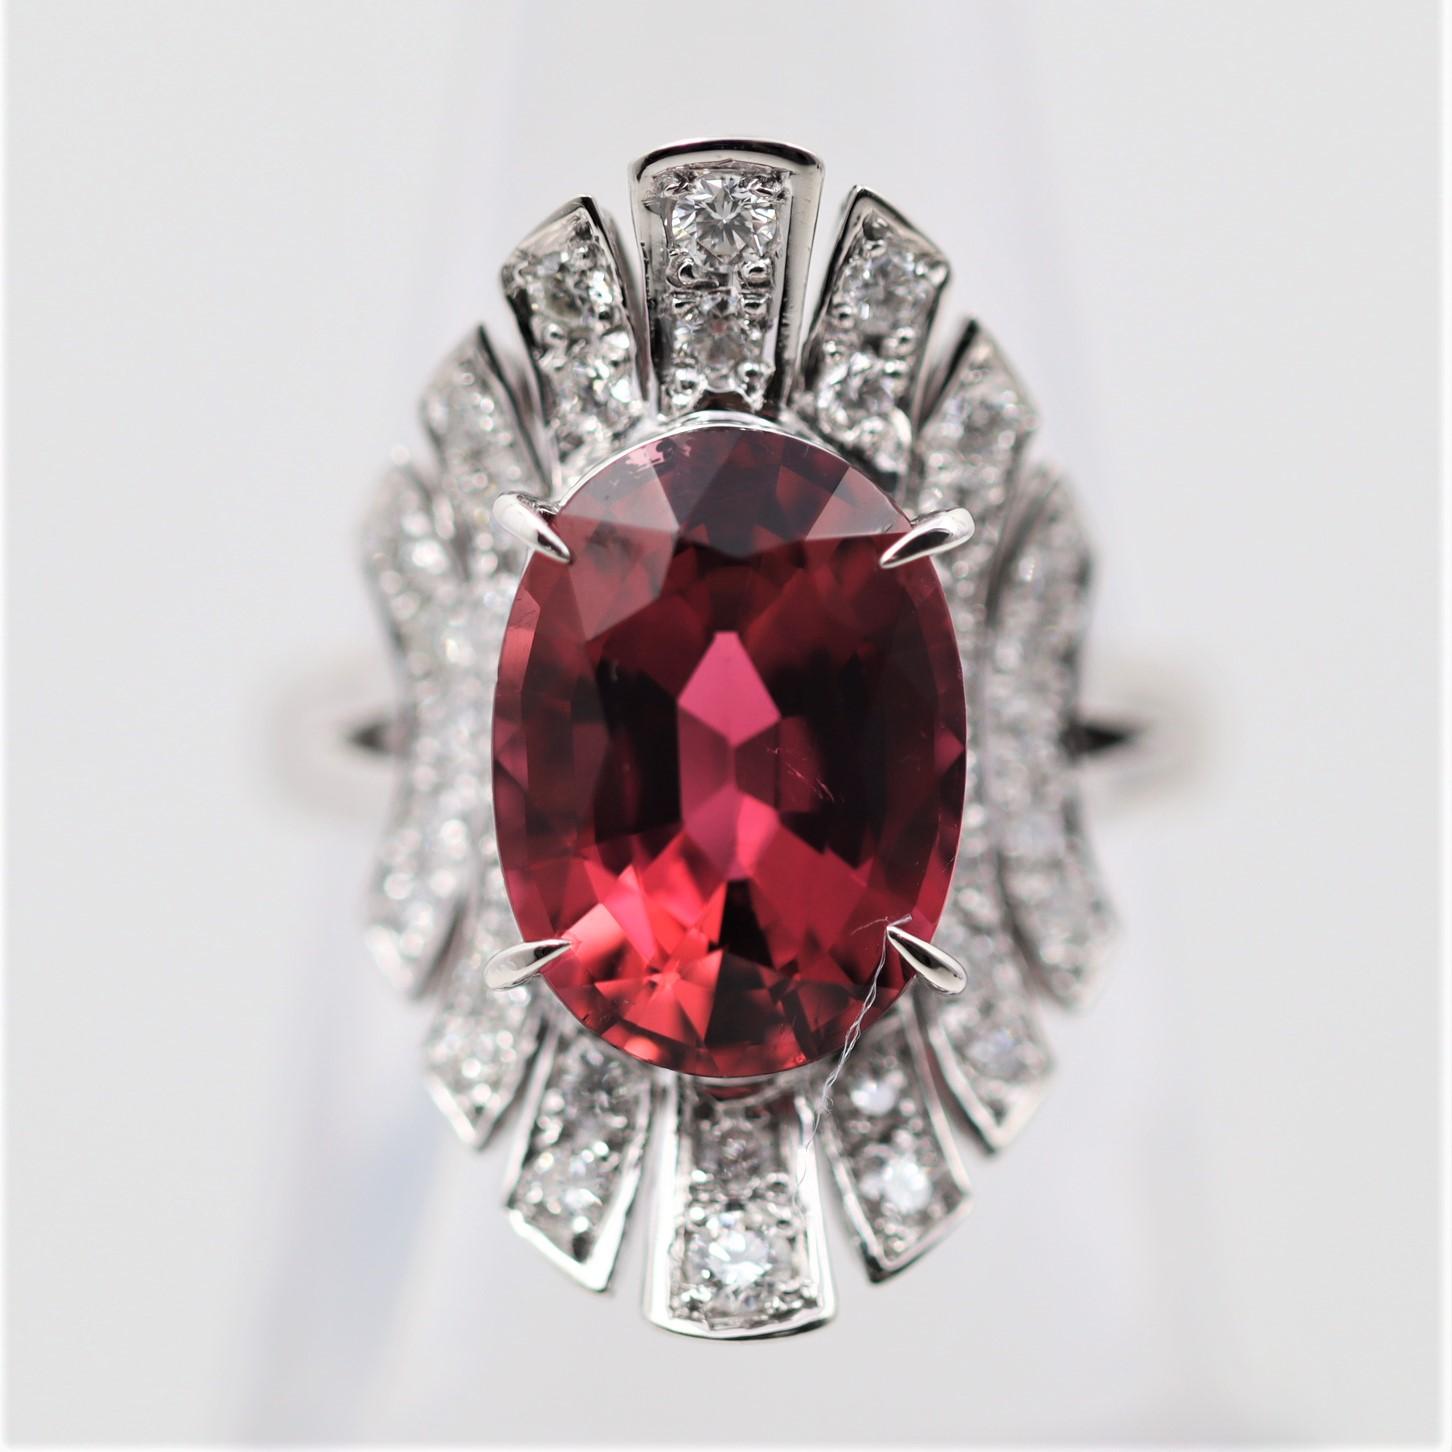 A sublime 5.26 carat oval-shape tourmaline takes center stage of this platinum made ring. It has a rich and vibrant slightly pinkish-red color. It is accented by 0.60 carats of diamonds set around the gemstone which add sparkle and brilliance to the